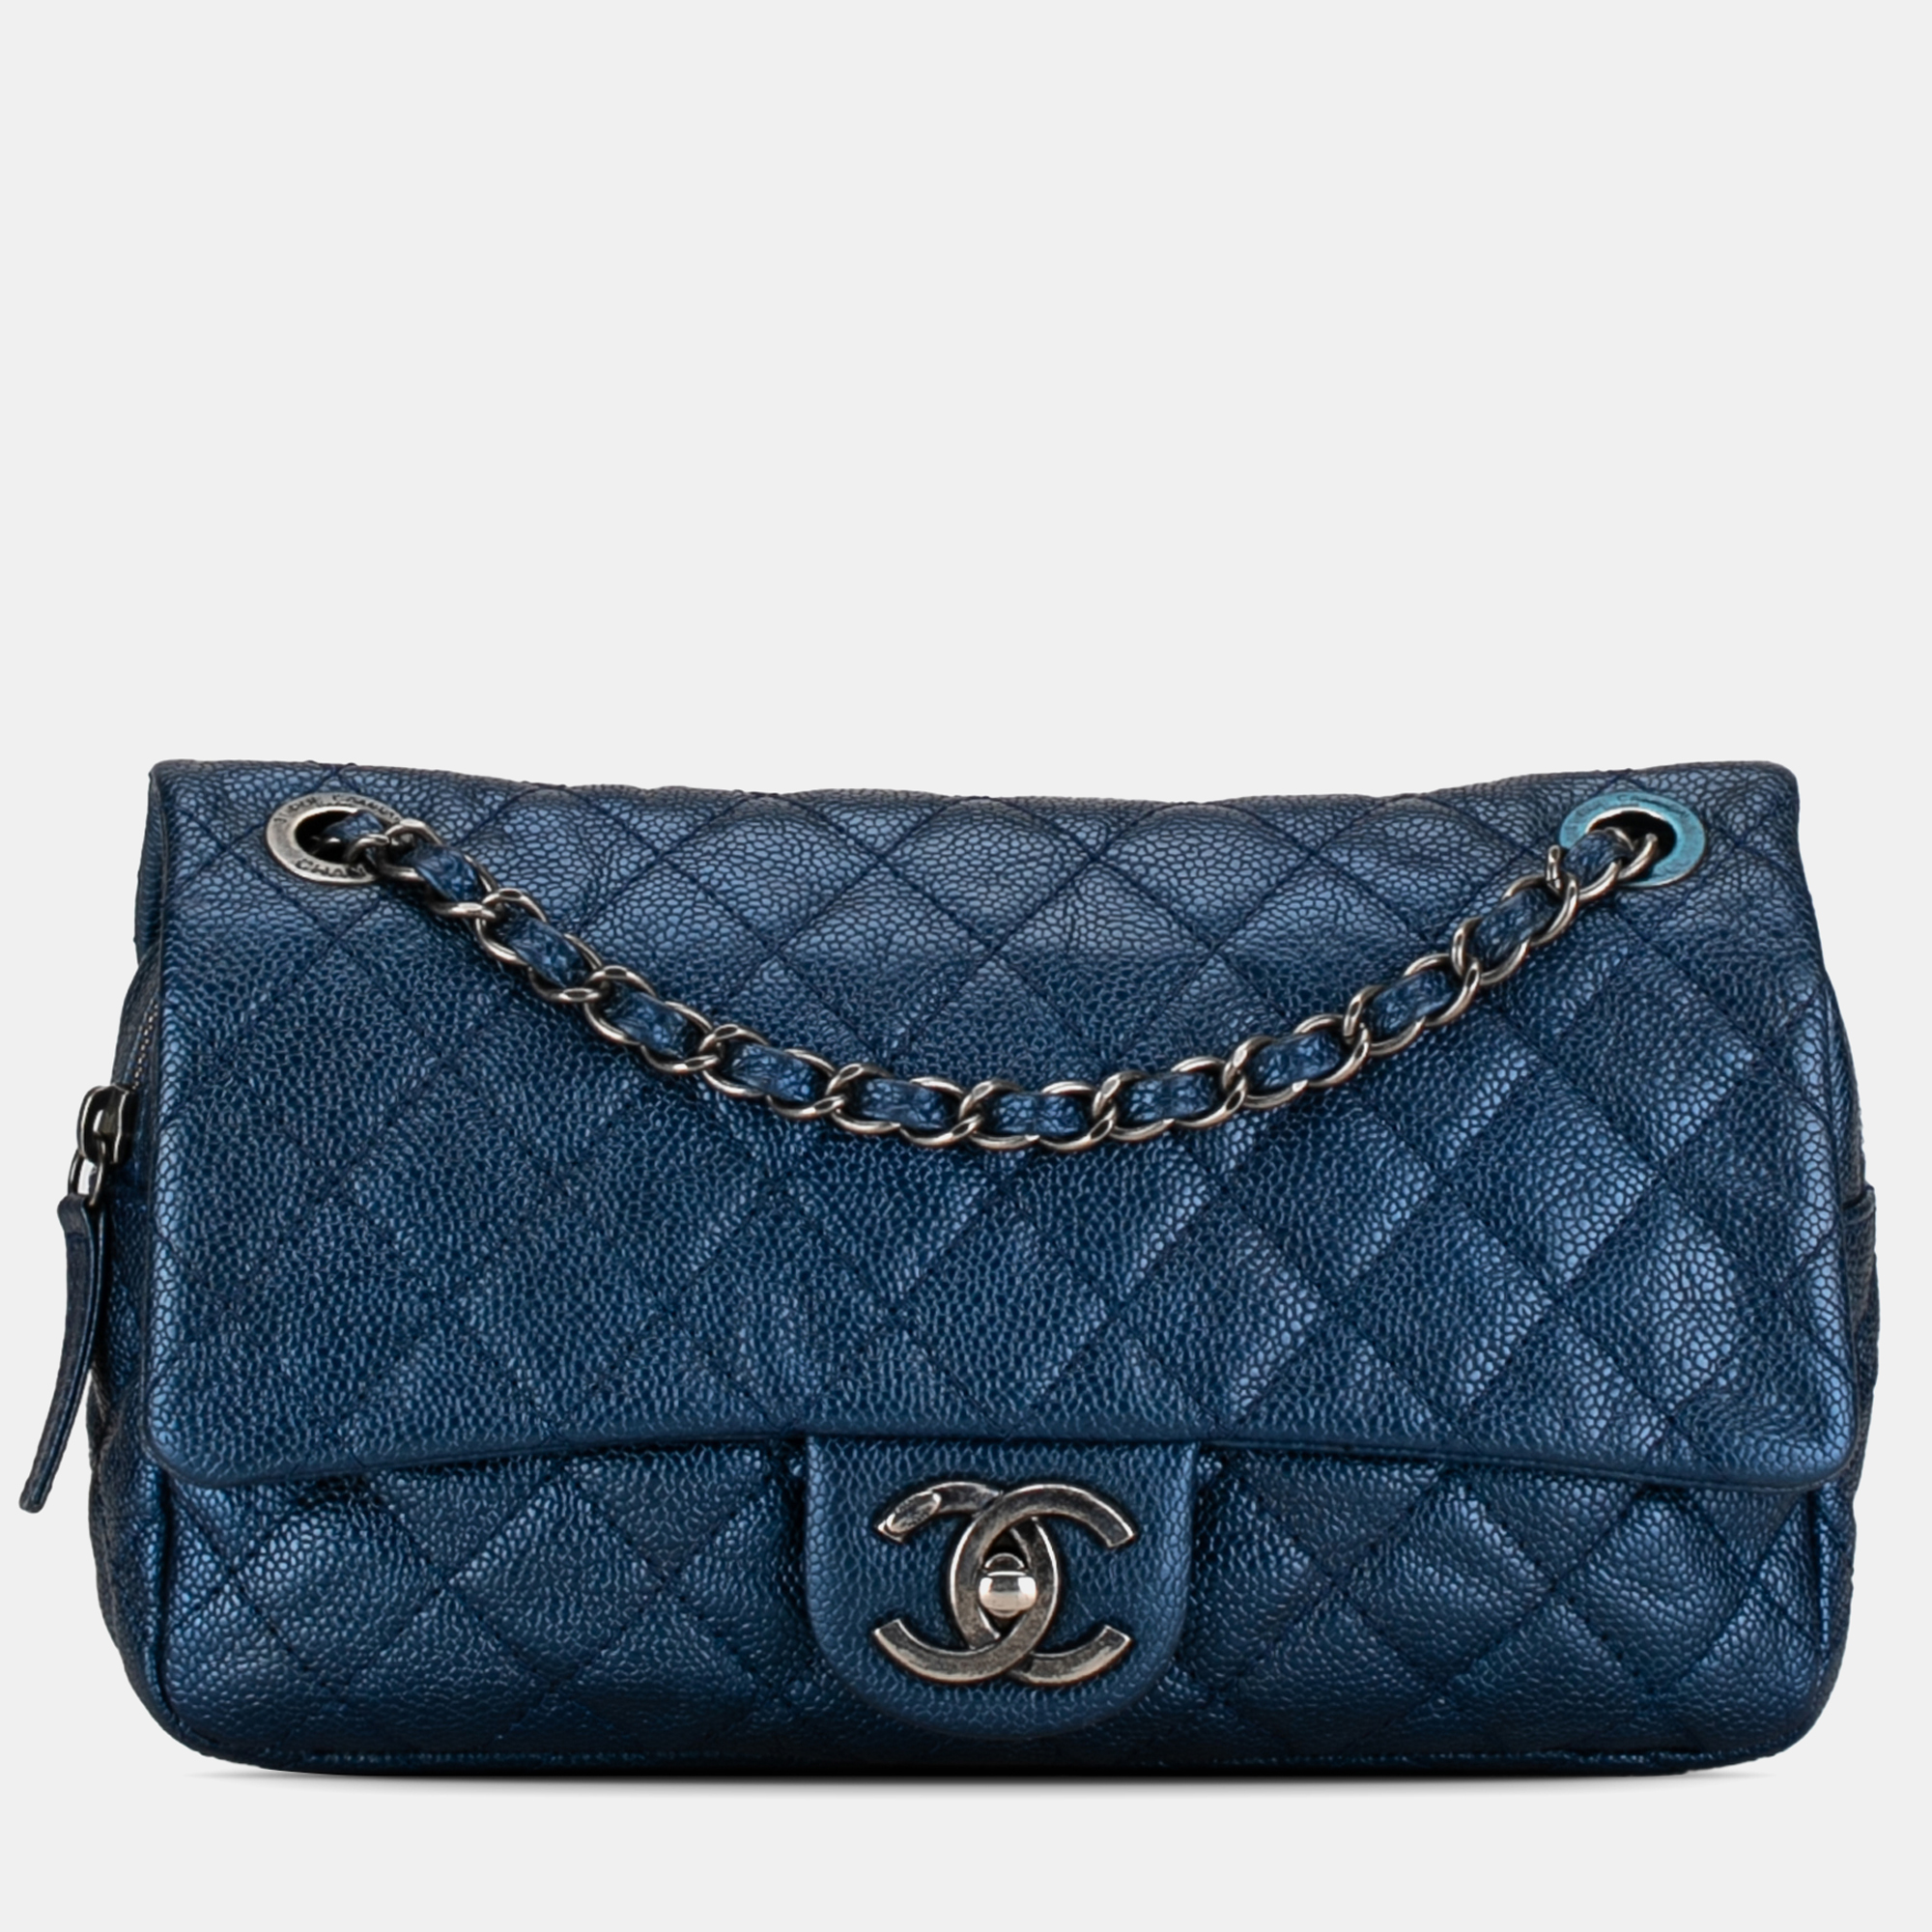 Chanel medium quilted caviar easy flap